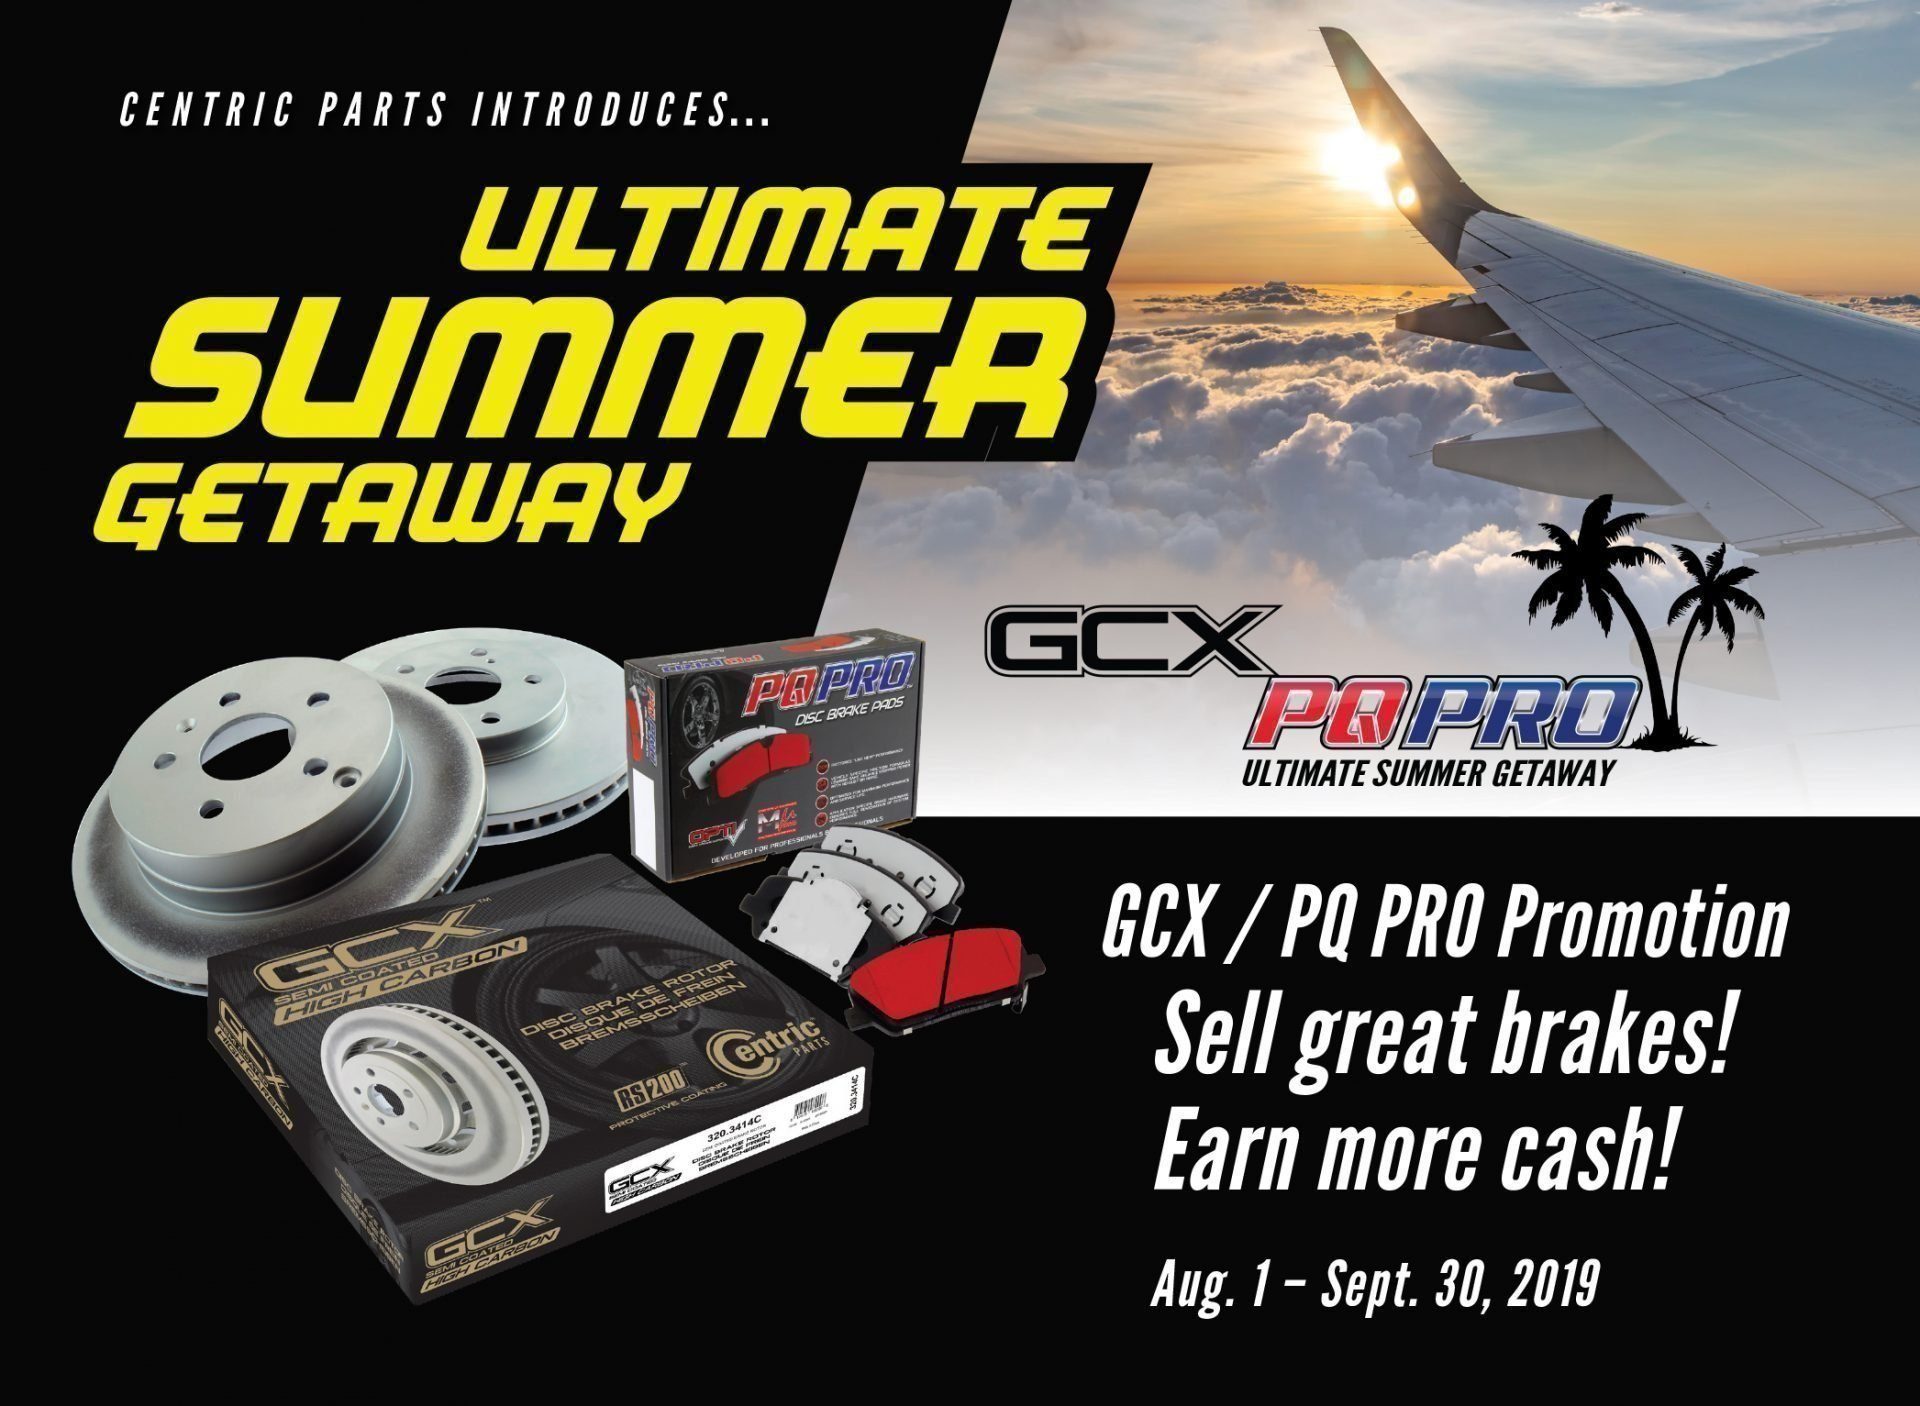 Centric Parts Launches ‘Ultimate Summer Getaway’